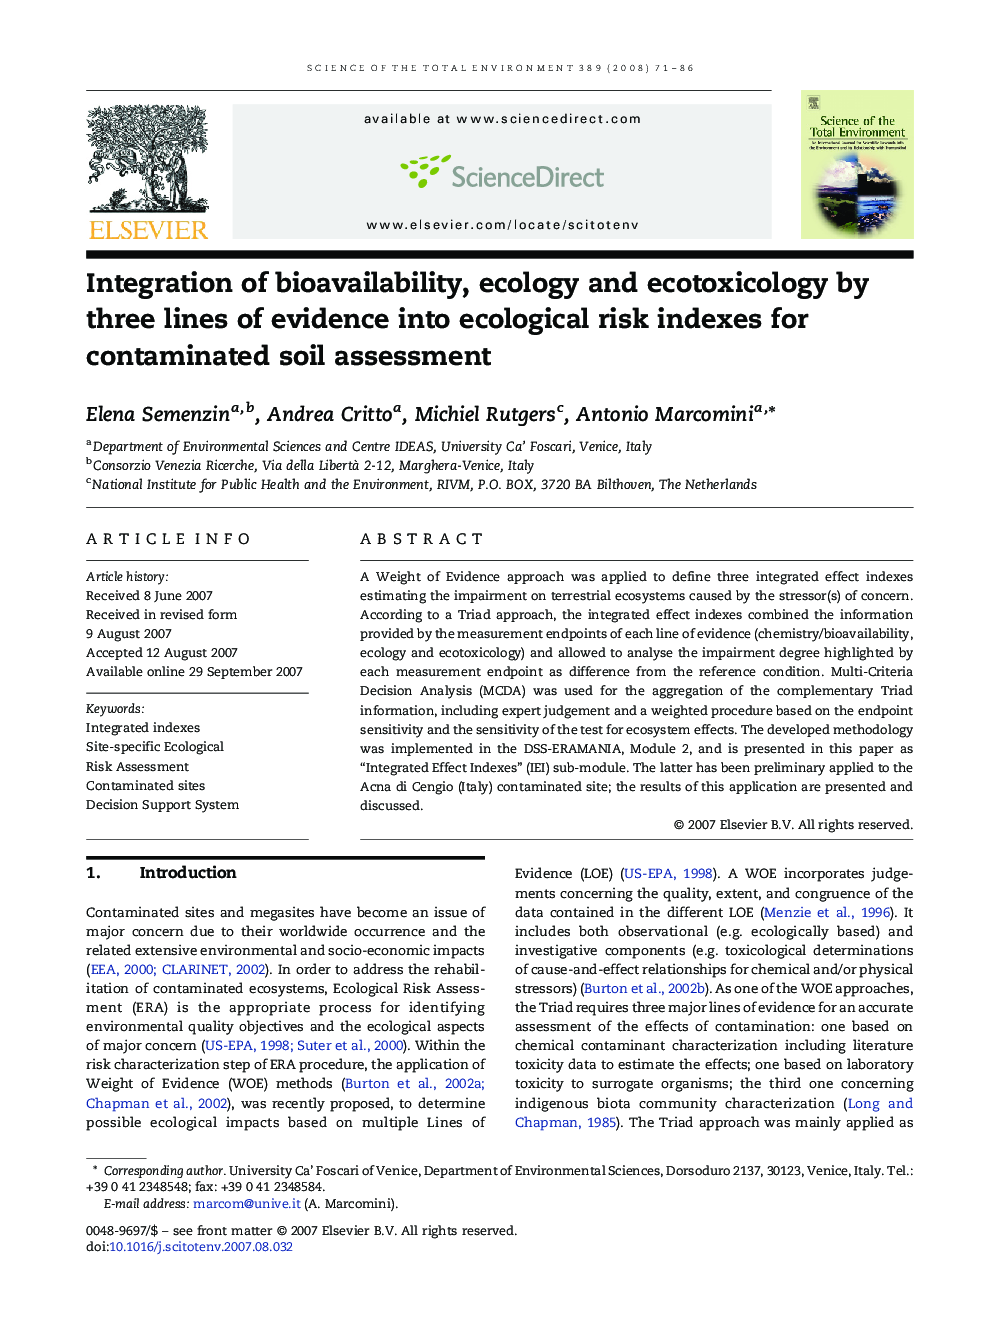 Integration of bioavailability, ecology and ecotoxicology by three lines of evidence into ecological risk indexes for contaminated soil assessment